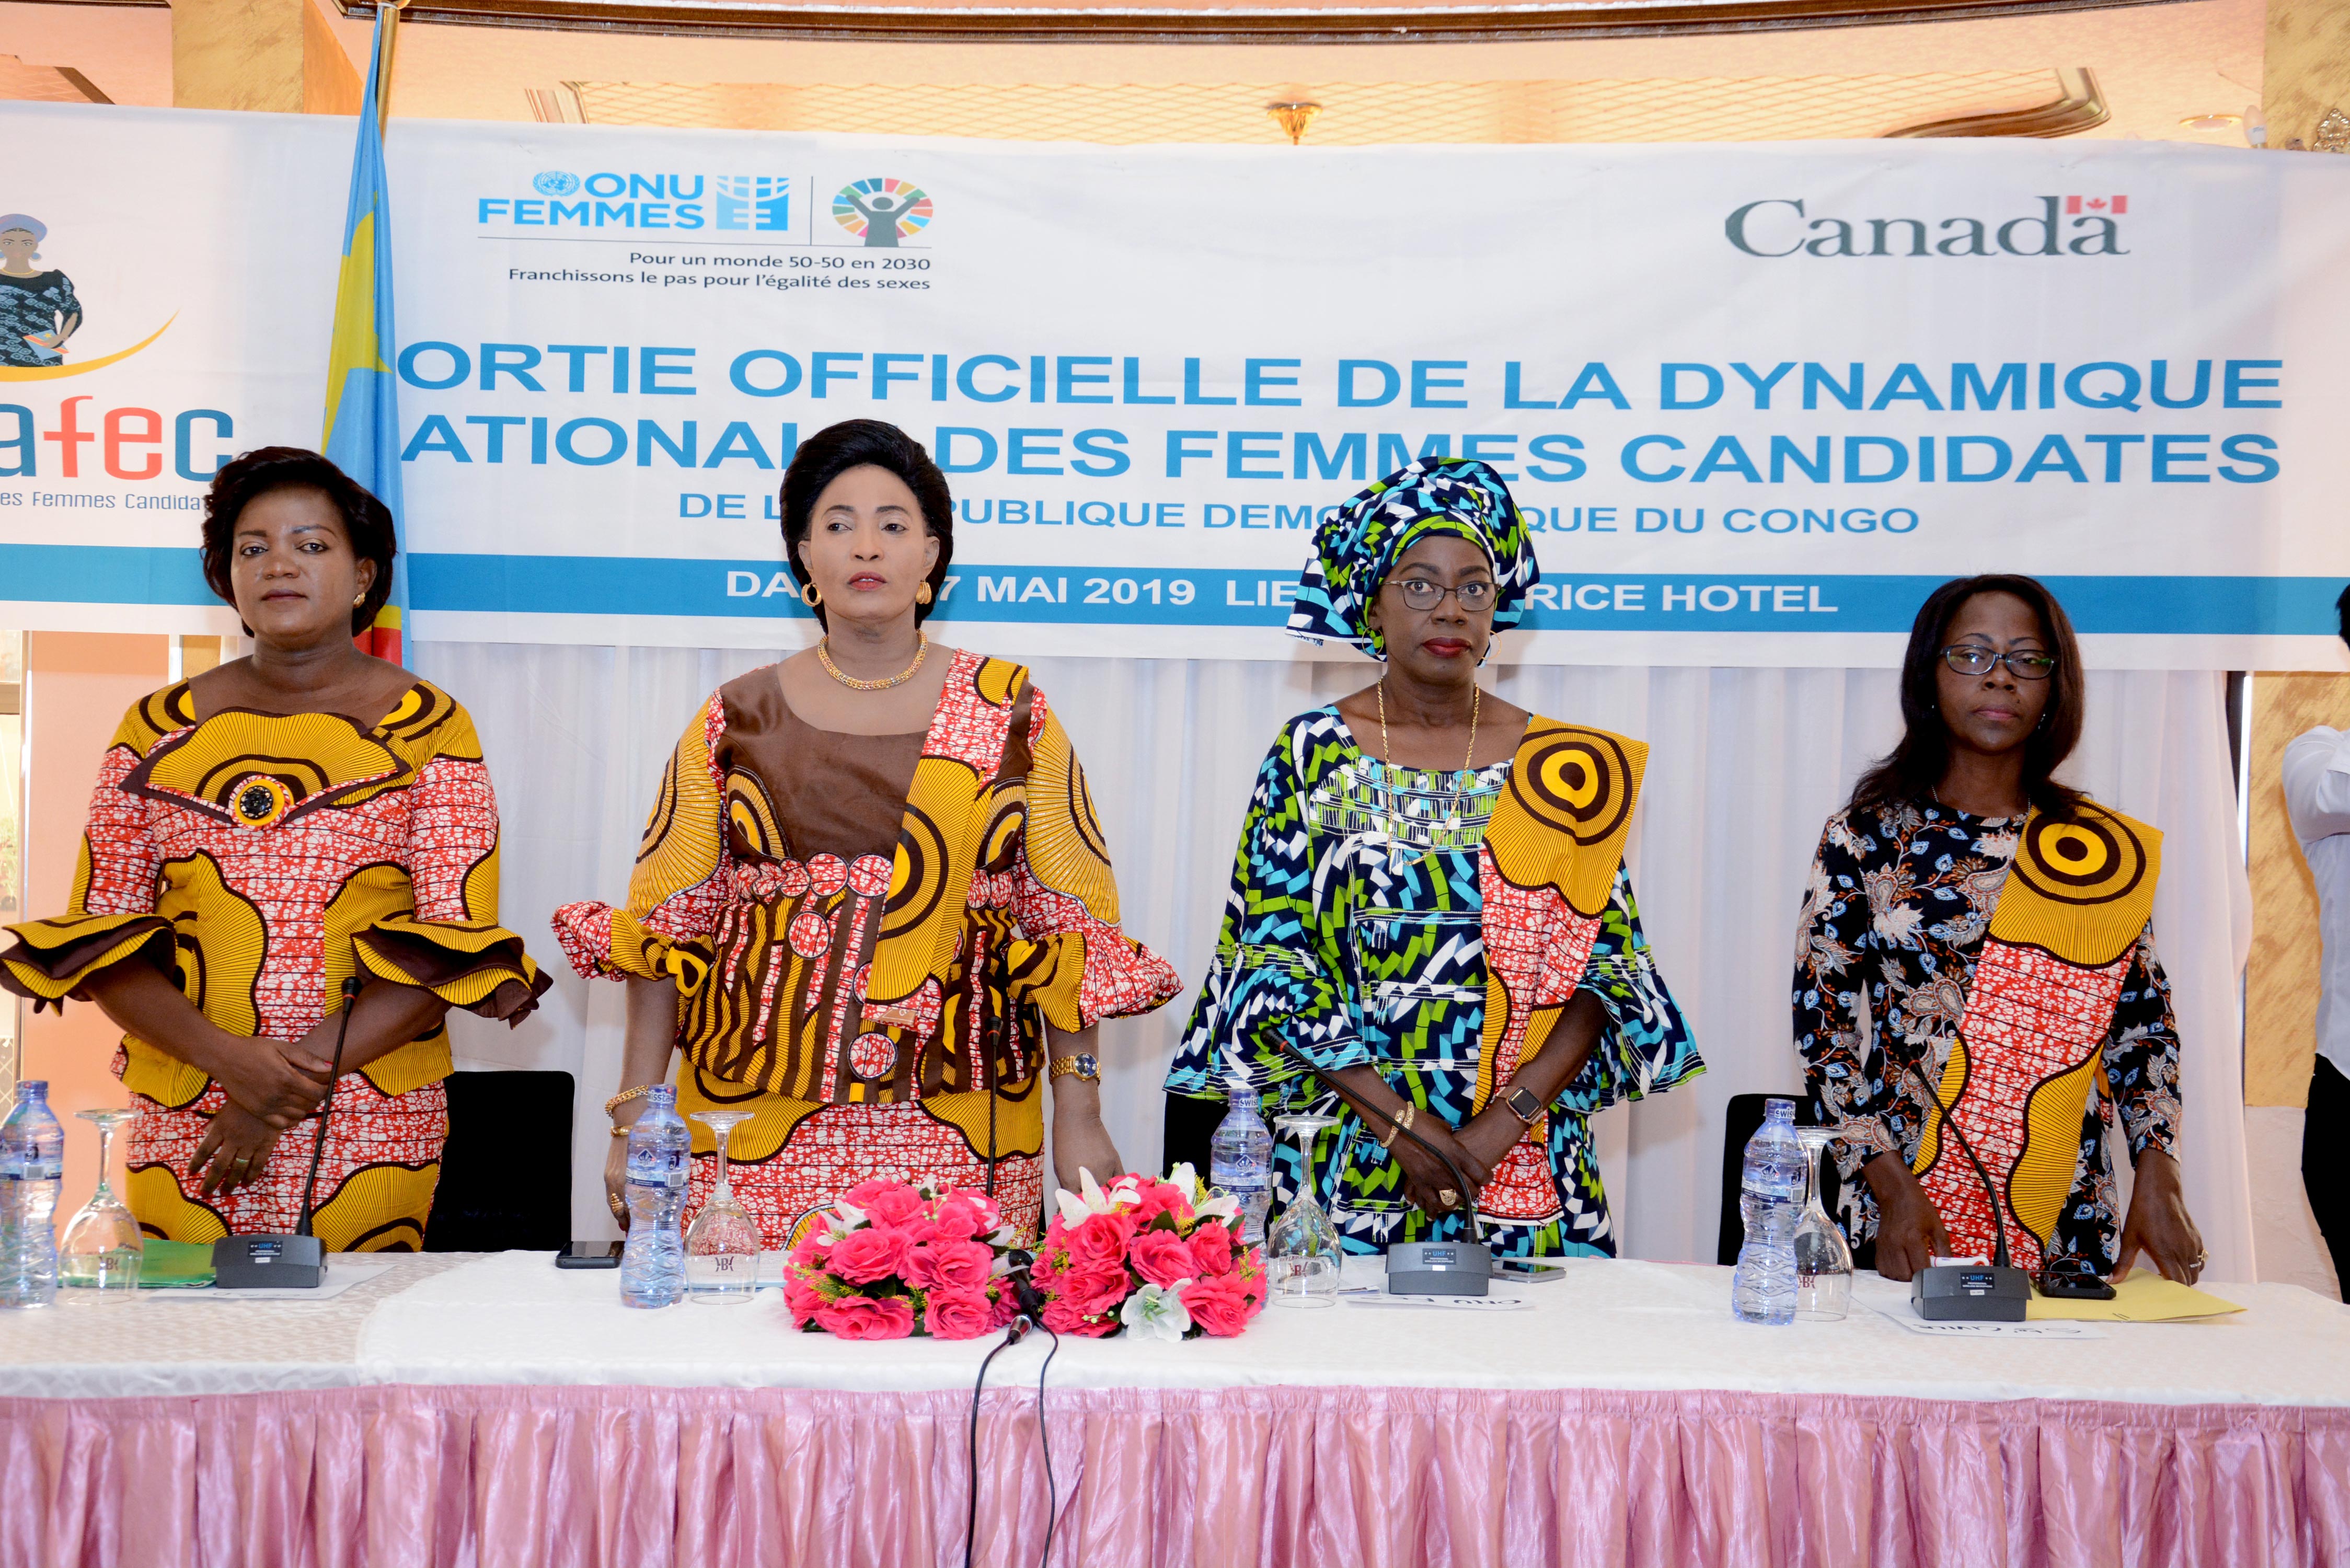 Kinshasa, May 17, 2019 – From left to right Carine, the Coordinator of DYNAFEC, Her Excellency Chantal Safou, Minister of Gender, Child and Family,Mme. Awa Ndiaye Seck, UN Women Representative in the DRC, Ms. Anna Mayimona, Civil Society.